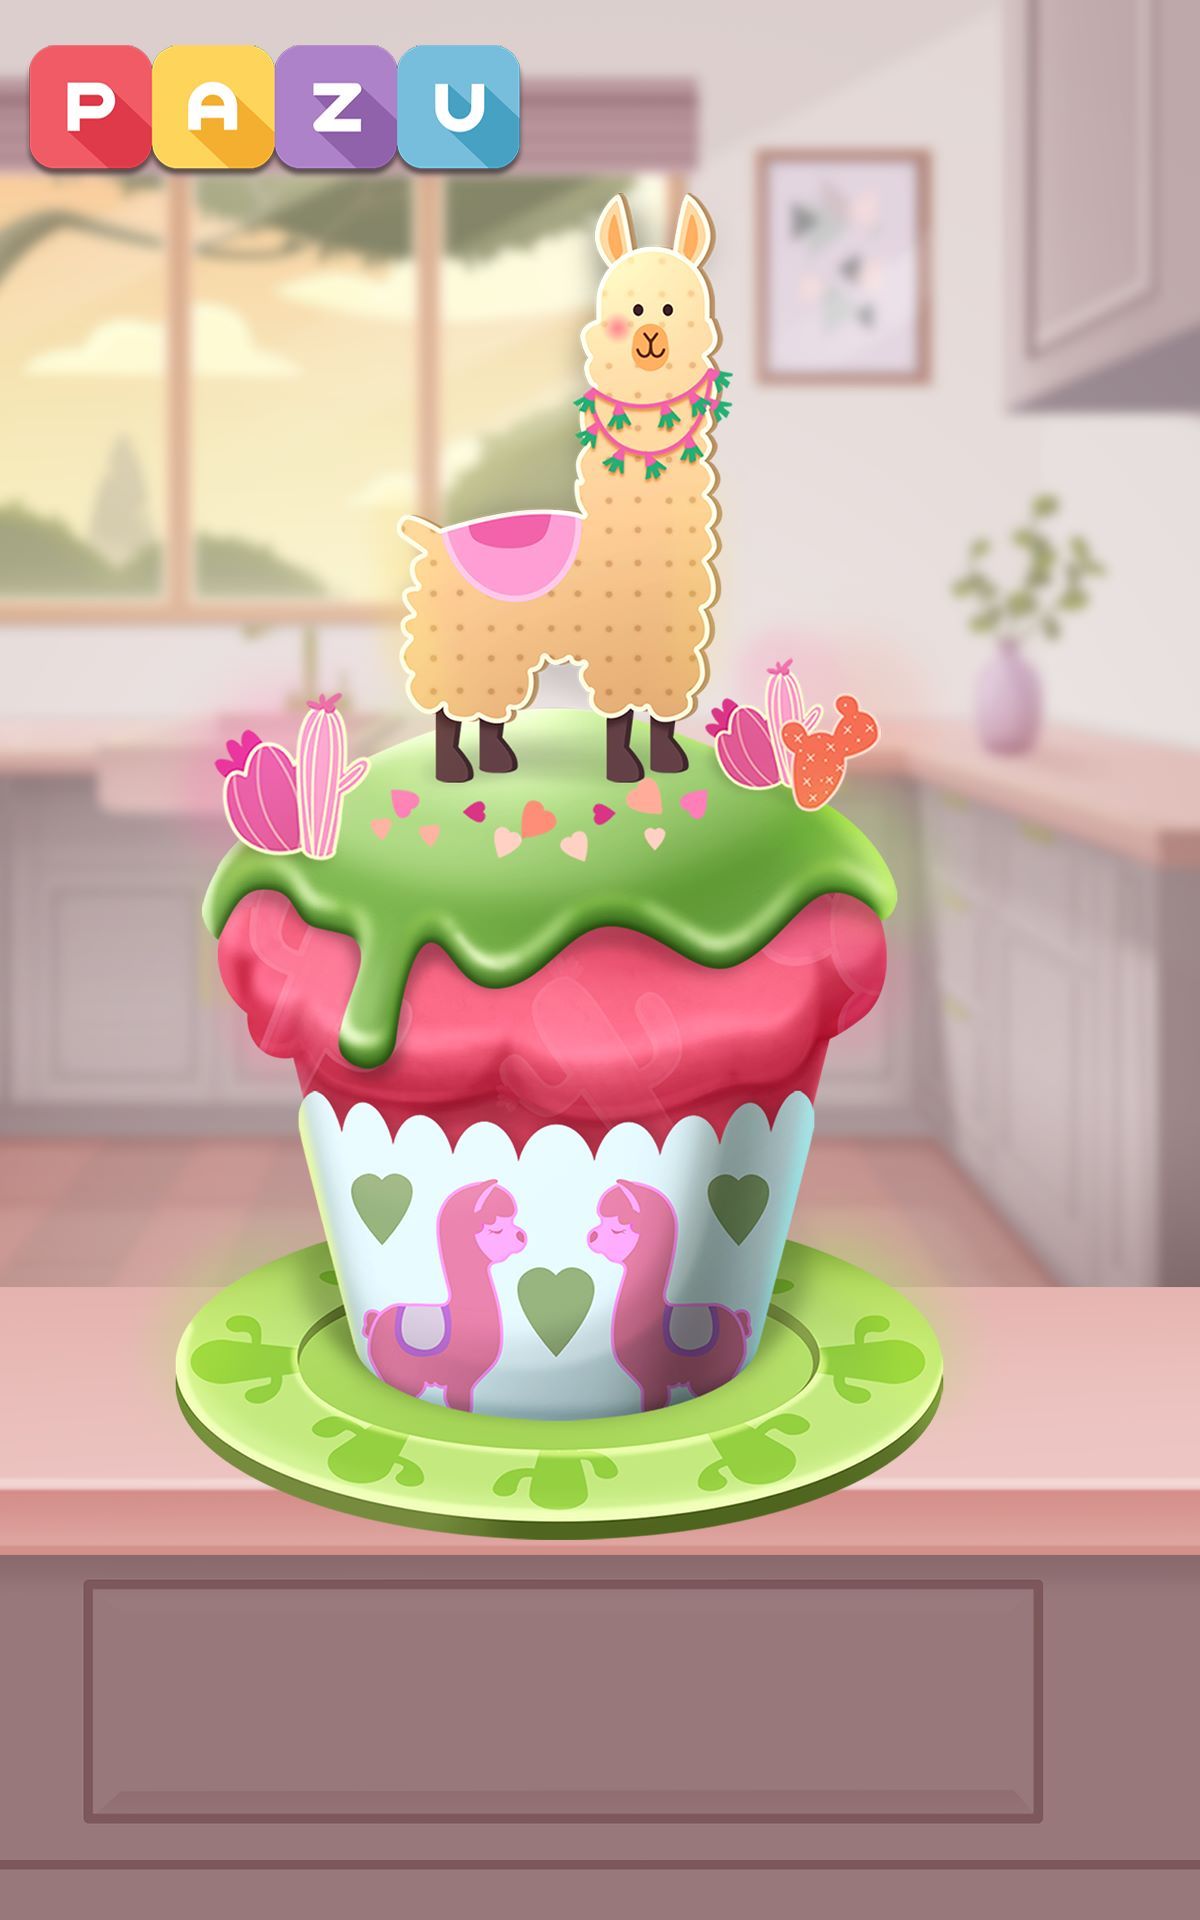 Cupcake maker - Cooking and baking games for kids